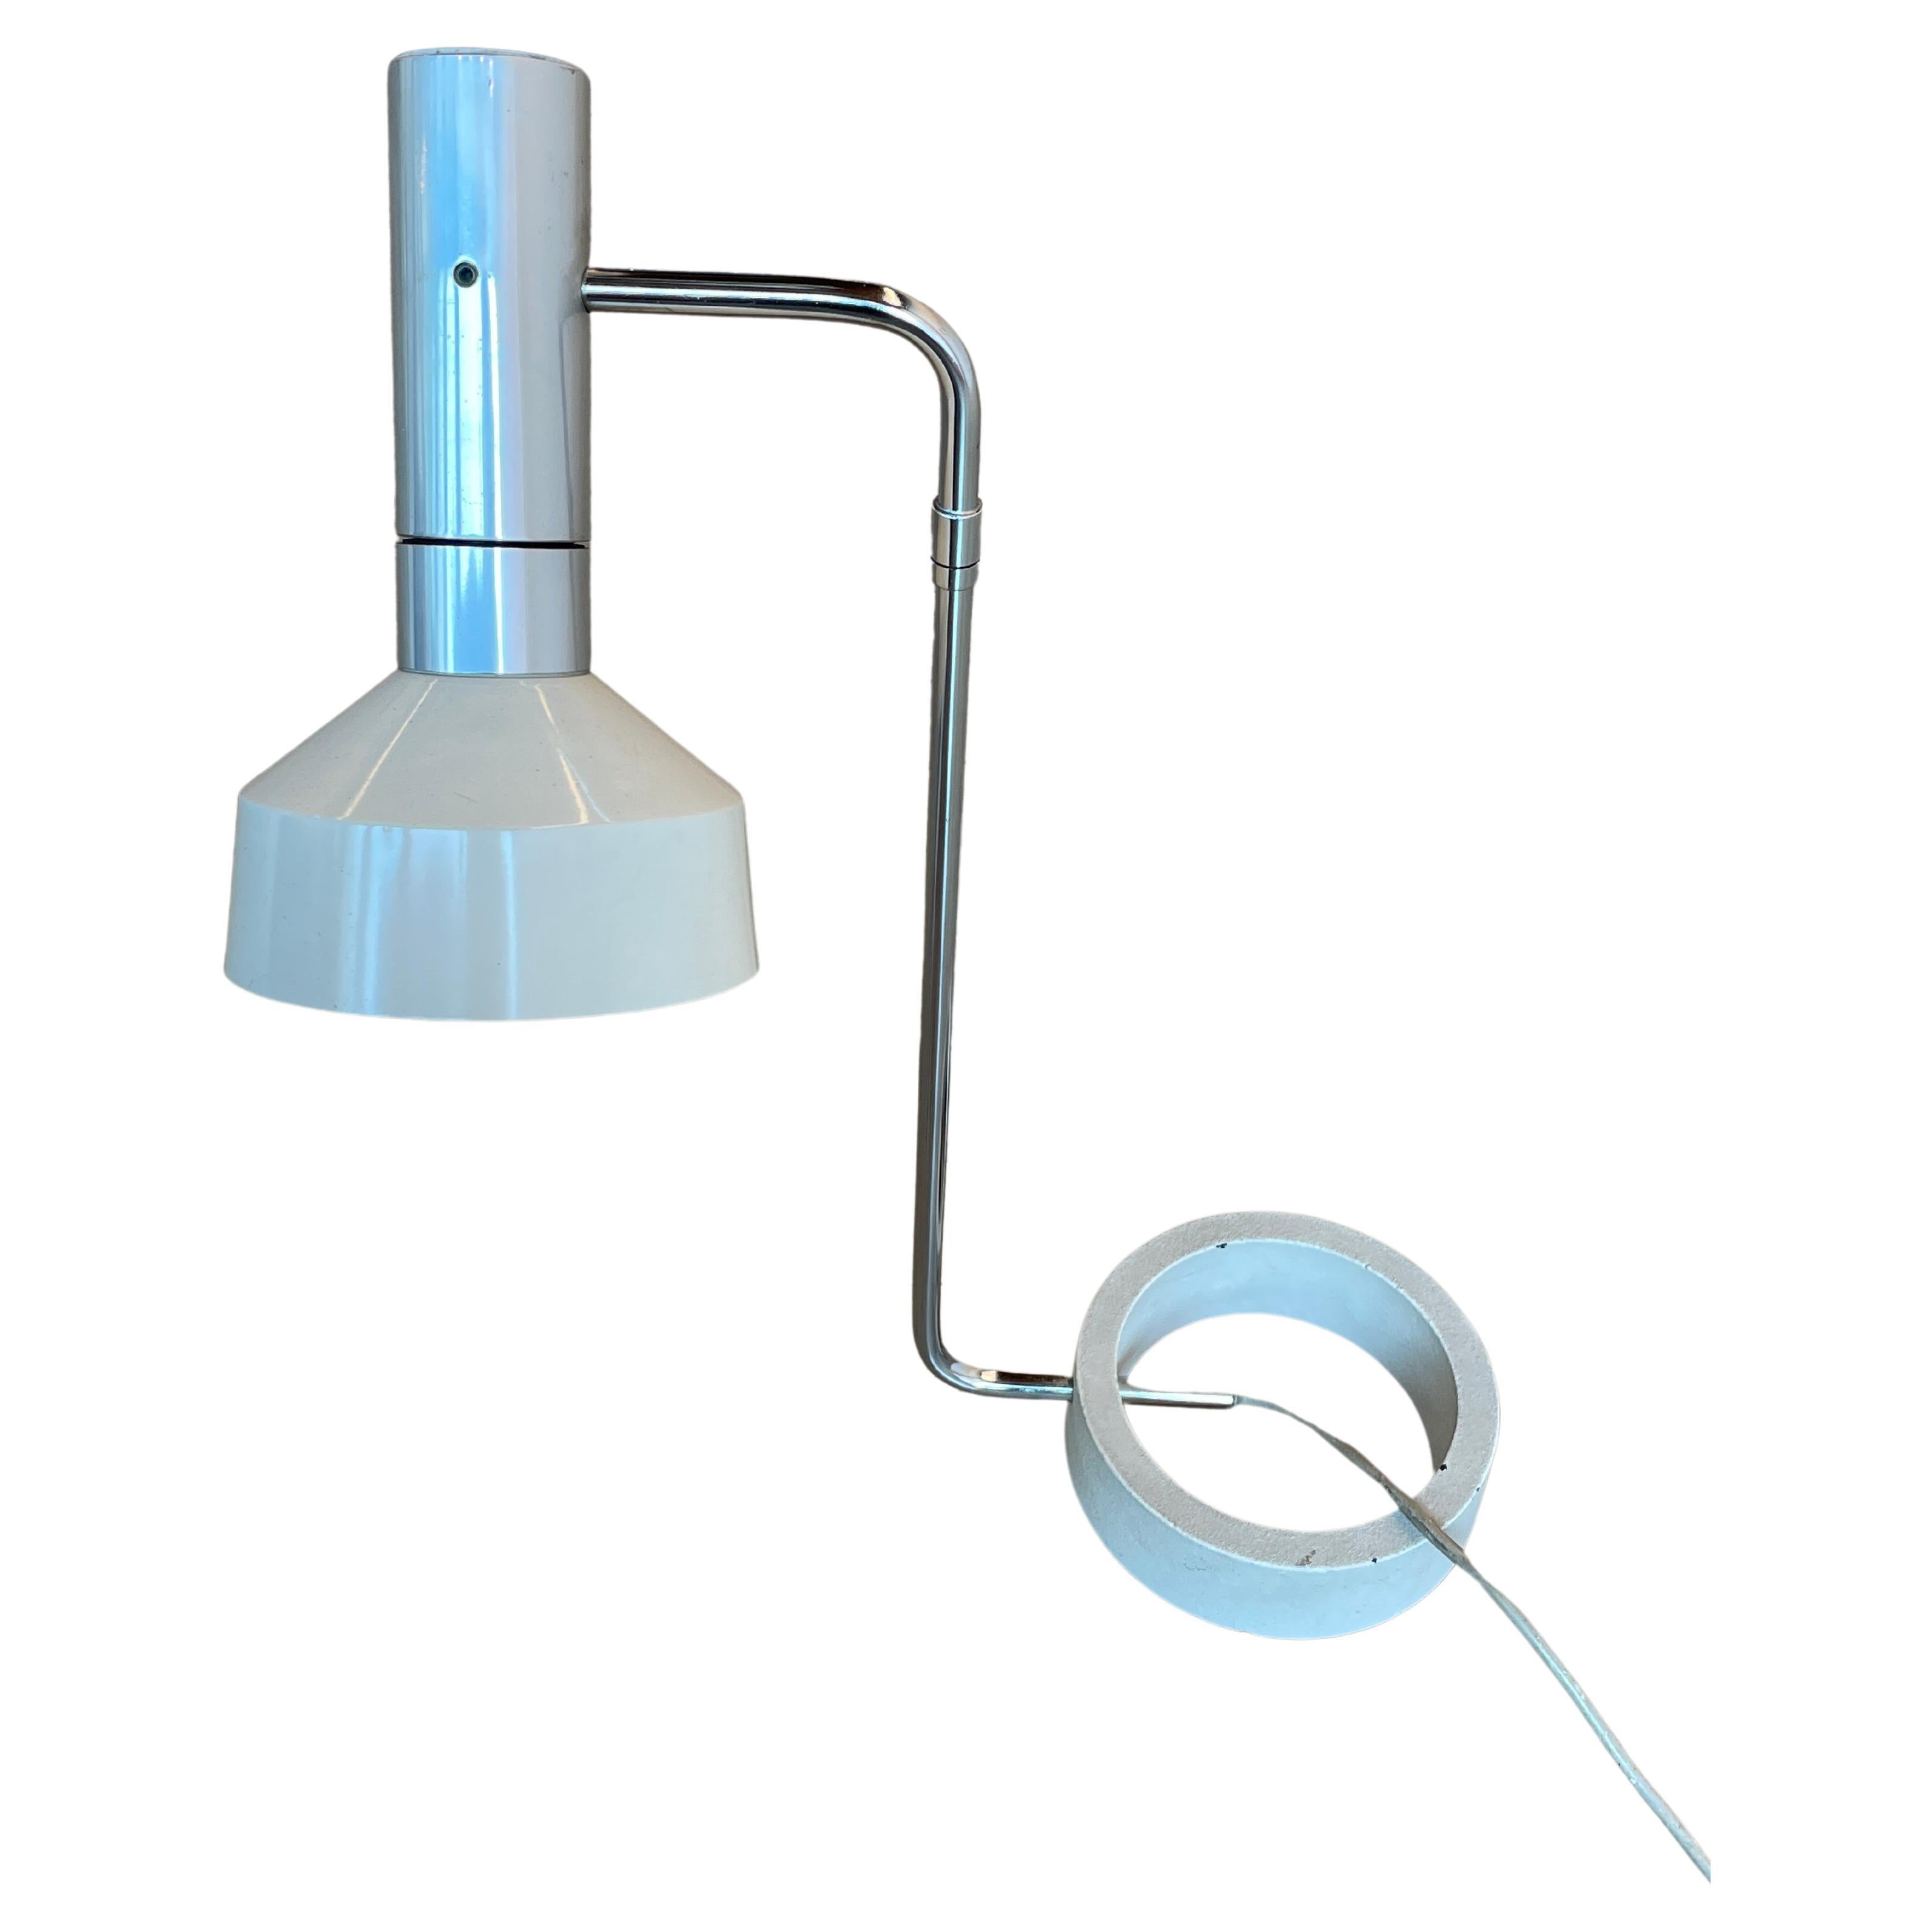 Model "Minilux" Adjustable Table Lamp by Rico & Rosmarie Baltensweiler, 1960s For Sale